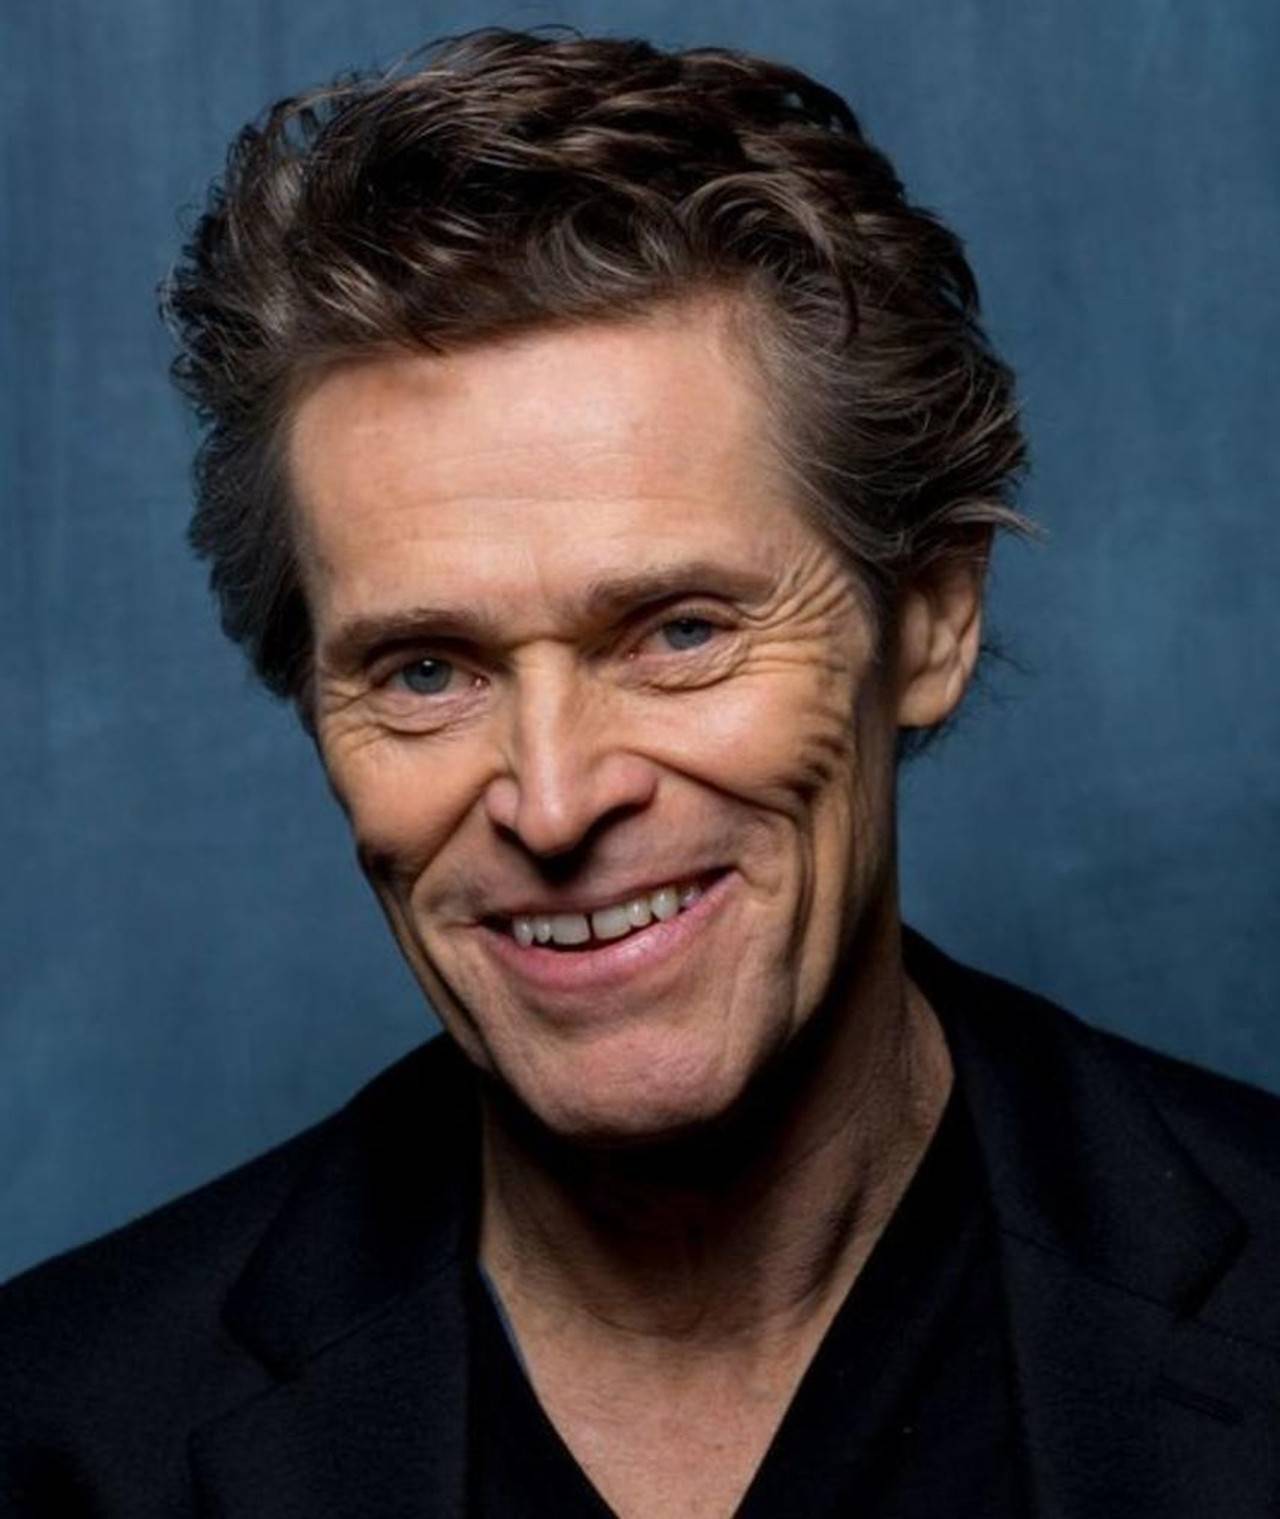 willem dafoe facts, fact about willem dafoe,